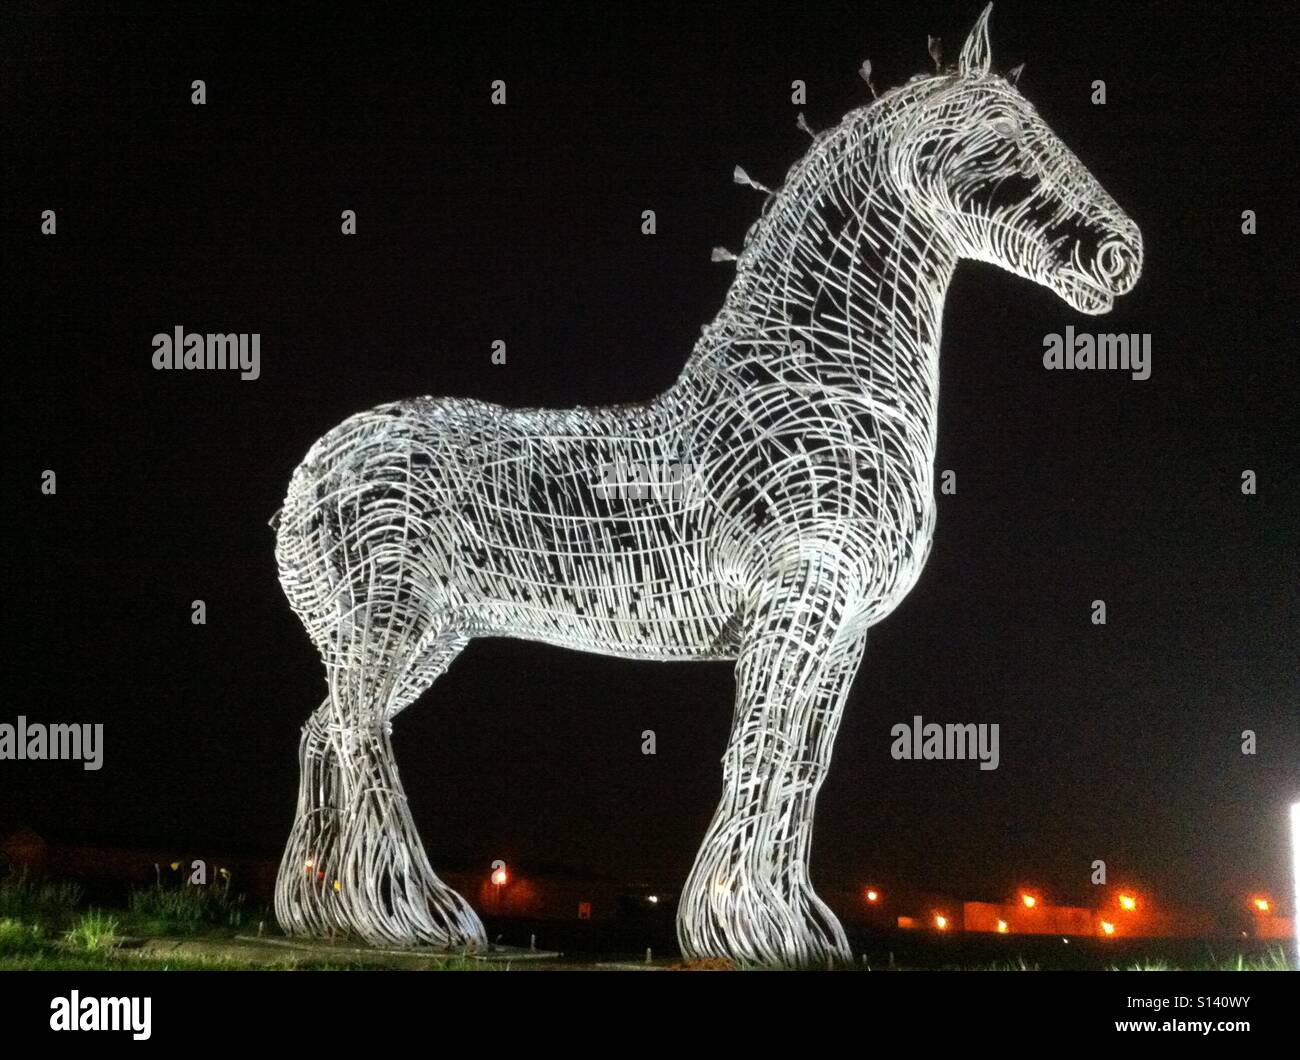 Heavy Horse Sculpture by Andy Scott at night, Easterhouse, Scotland Stock Photo